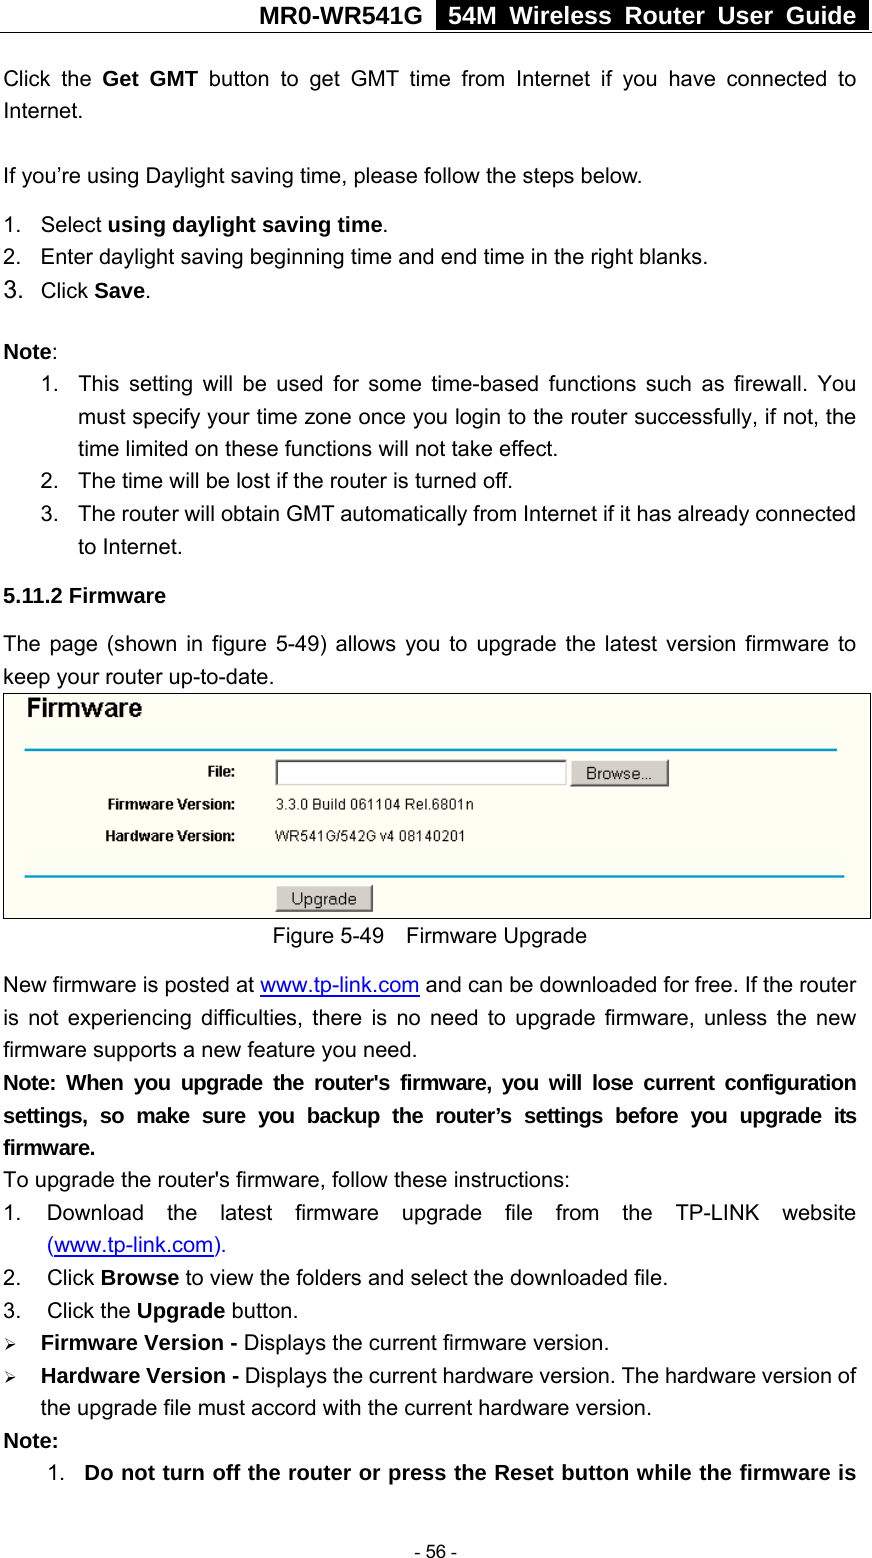 MR0-WR541G   54M Wireless Router User Guide  Click the Get GMT button to get GMT time from Internet if you have connected to Internet.   If you’re using Daylight saving time, please follow the steps below. 1. Select using daylight saving time.  2.  Enter daylight saving beginning time and end time in the right blanks.   3.  Click Save.   Note:  1.  This setting will be used for some time-based functions such as firewall. You must specify your time zone once you login to the router successfully, if not, the time limited on these functions will not take effect.   2.  The time will be lost if the router is turned off.   3.  The router will obtain GMT automatically from Internet if it has already connected to Internet. 5.11.2 Firmware The page (shown in figure 5-49) allows you to upgrade the latest version firmware to keep your router up-to-date.  Figure 5-49  Firmware Upgrade New firmware is posted at www.tp-link.com and can be downloaded for free. If the router is not experiencing difficulties, there is no need to upgrade firmware, unless the new firmware supports a new feature you need. Note: When you upgrade the router&apos;s firmware, you will lose current configuration settings, so make sure you backup the router’s settings before you upgrade its firmware. To upgrade the router&apos;s firmware, follow these instructions: 1.  Download the latest firmware upgrade file from the TP-LINK website (www.tp-link.com).  2. Click Browse to view the folders and select the downloaded file.   3. Click the Upgrade button.   ¾ Firmware Version - Displays the current firmware version. ¾ Hardware Version - Displays the current hardware version. The hardware version of the upgrade file must accord with the current hardware version. Note:  1.  Do not turn off the router or press the Reset button while the firmware is  - 56 - 